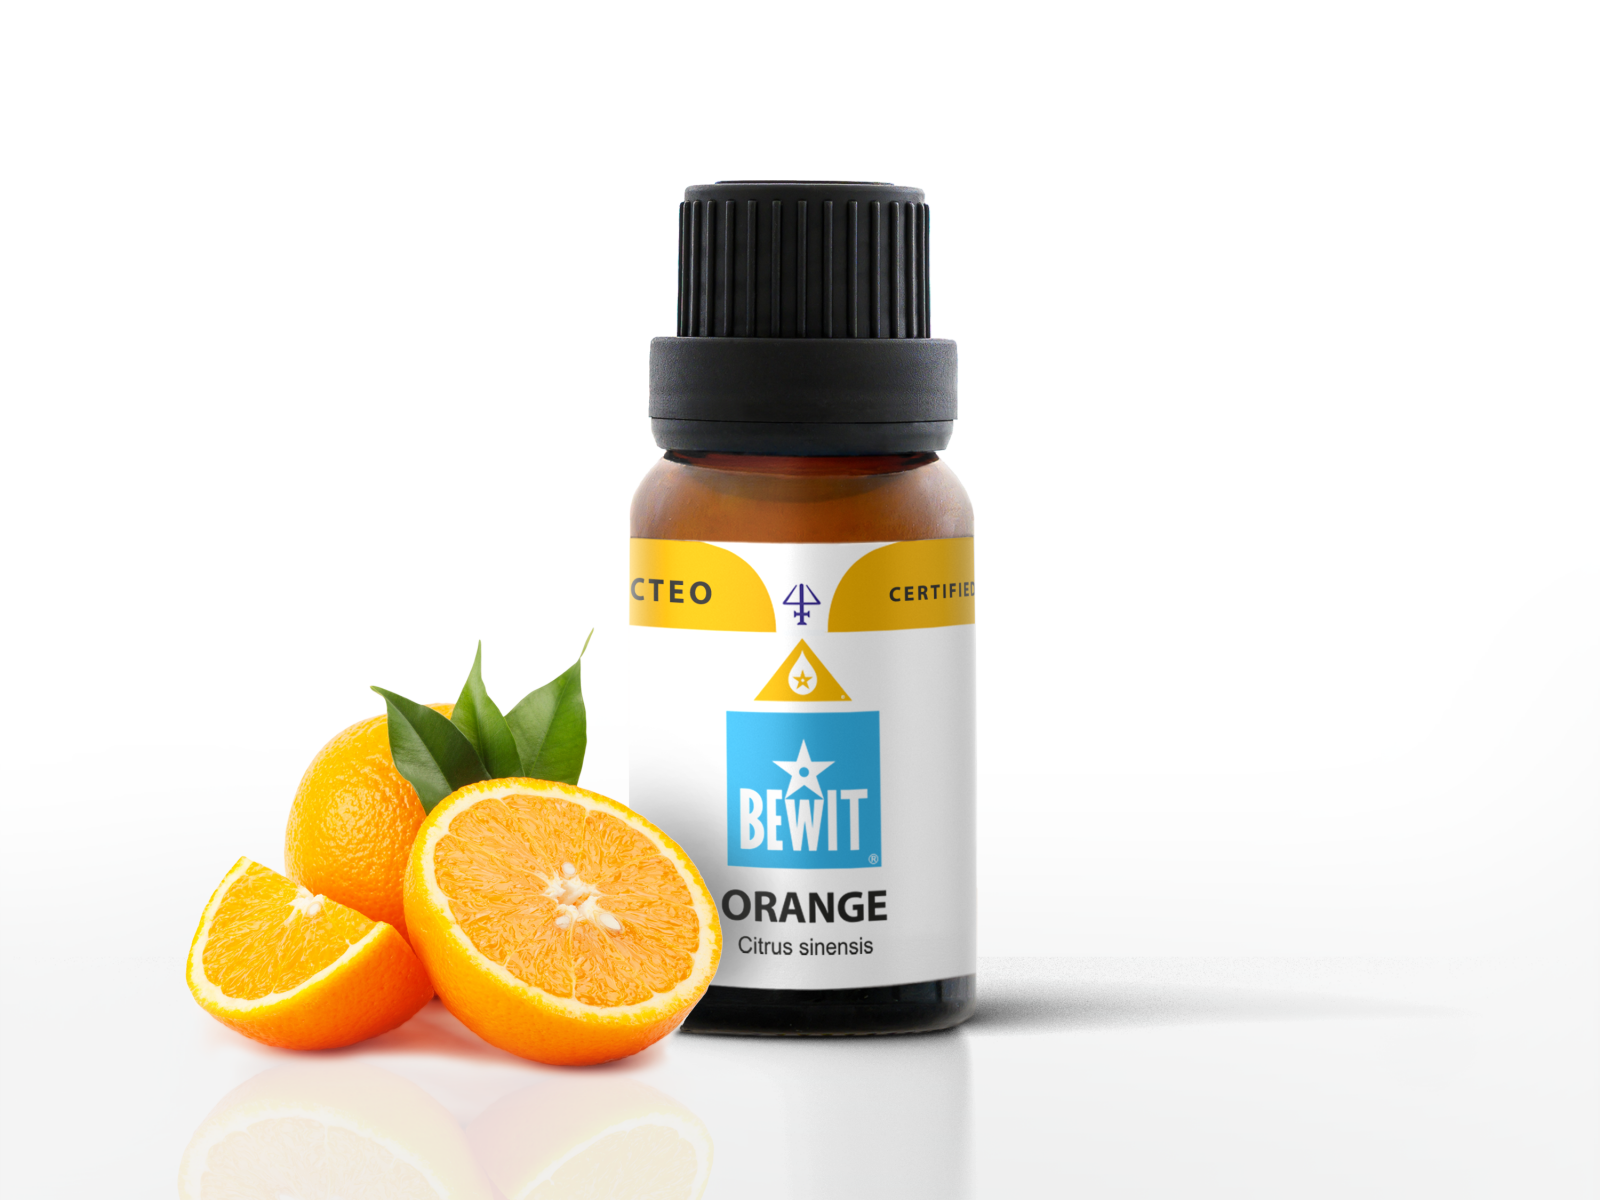 BEWIT Orange - 100% pure and natural CTEO® essential oil